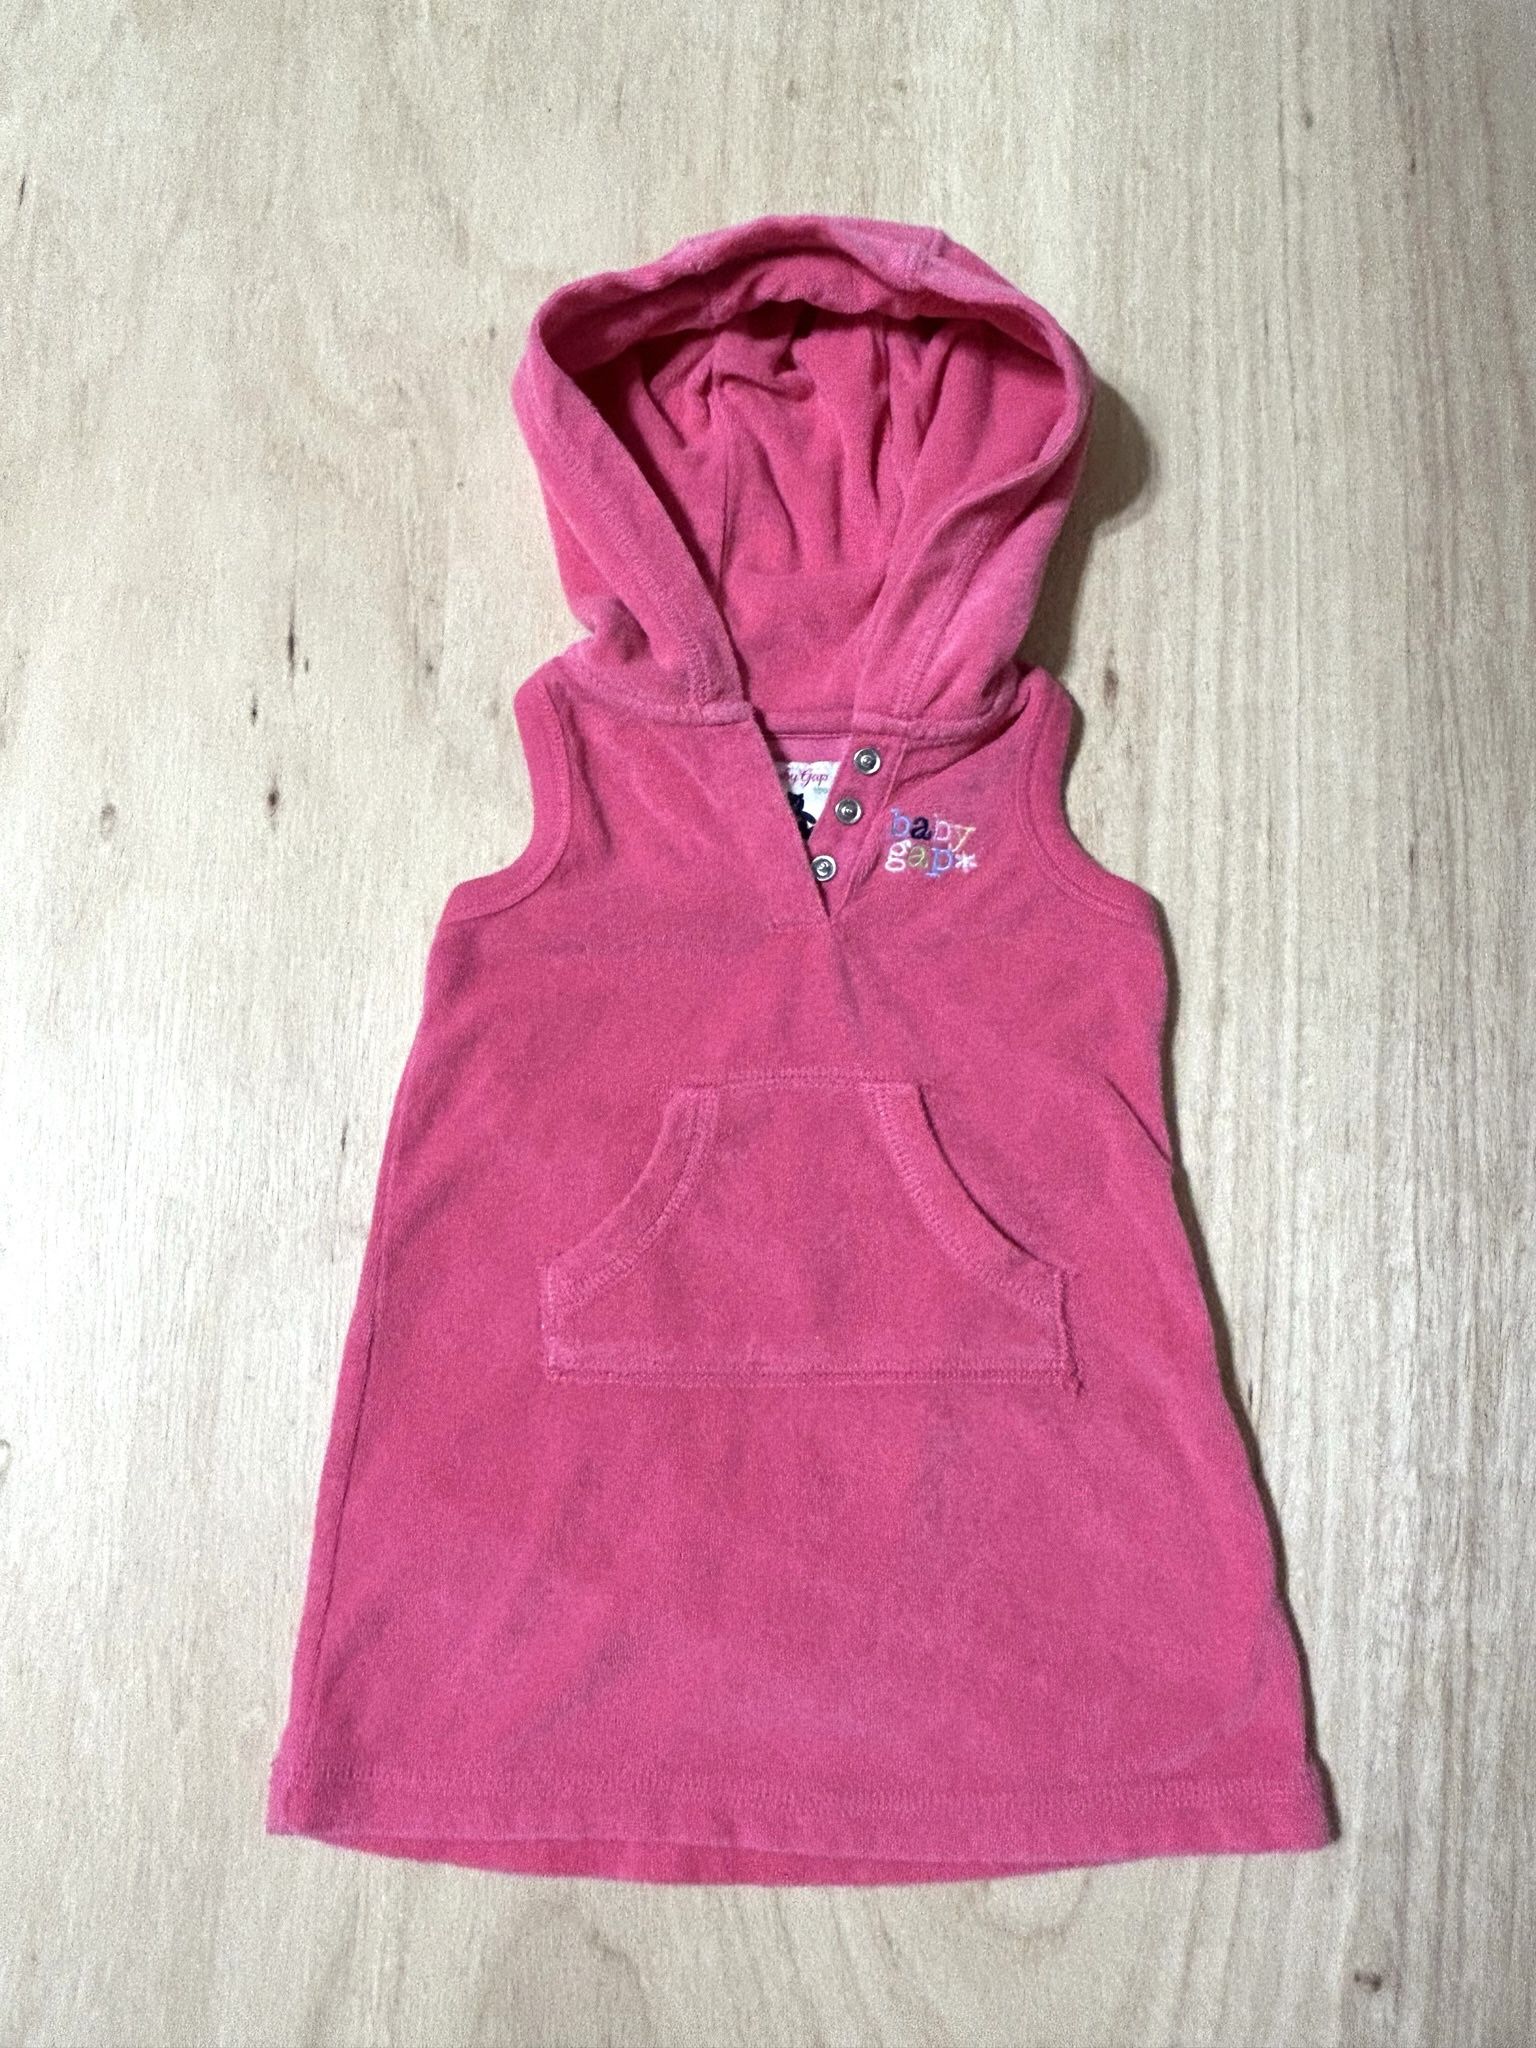 Baby Girl Pink Terry Cloth Hoodie Dress Baby gap 3-6 Month